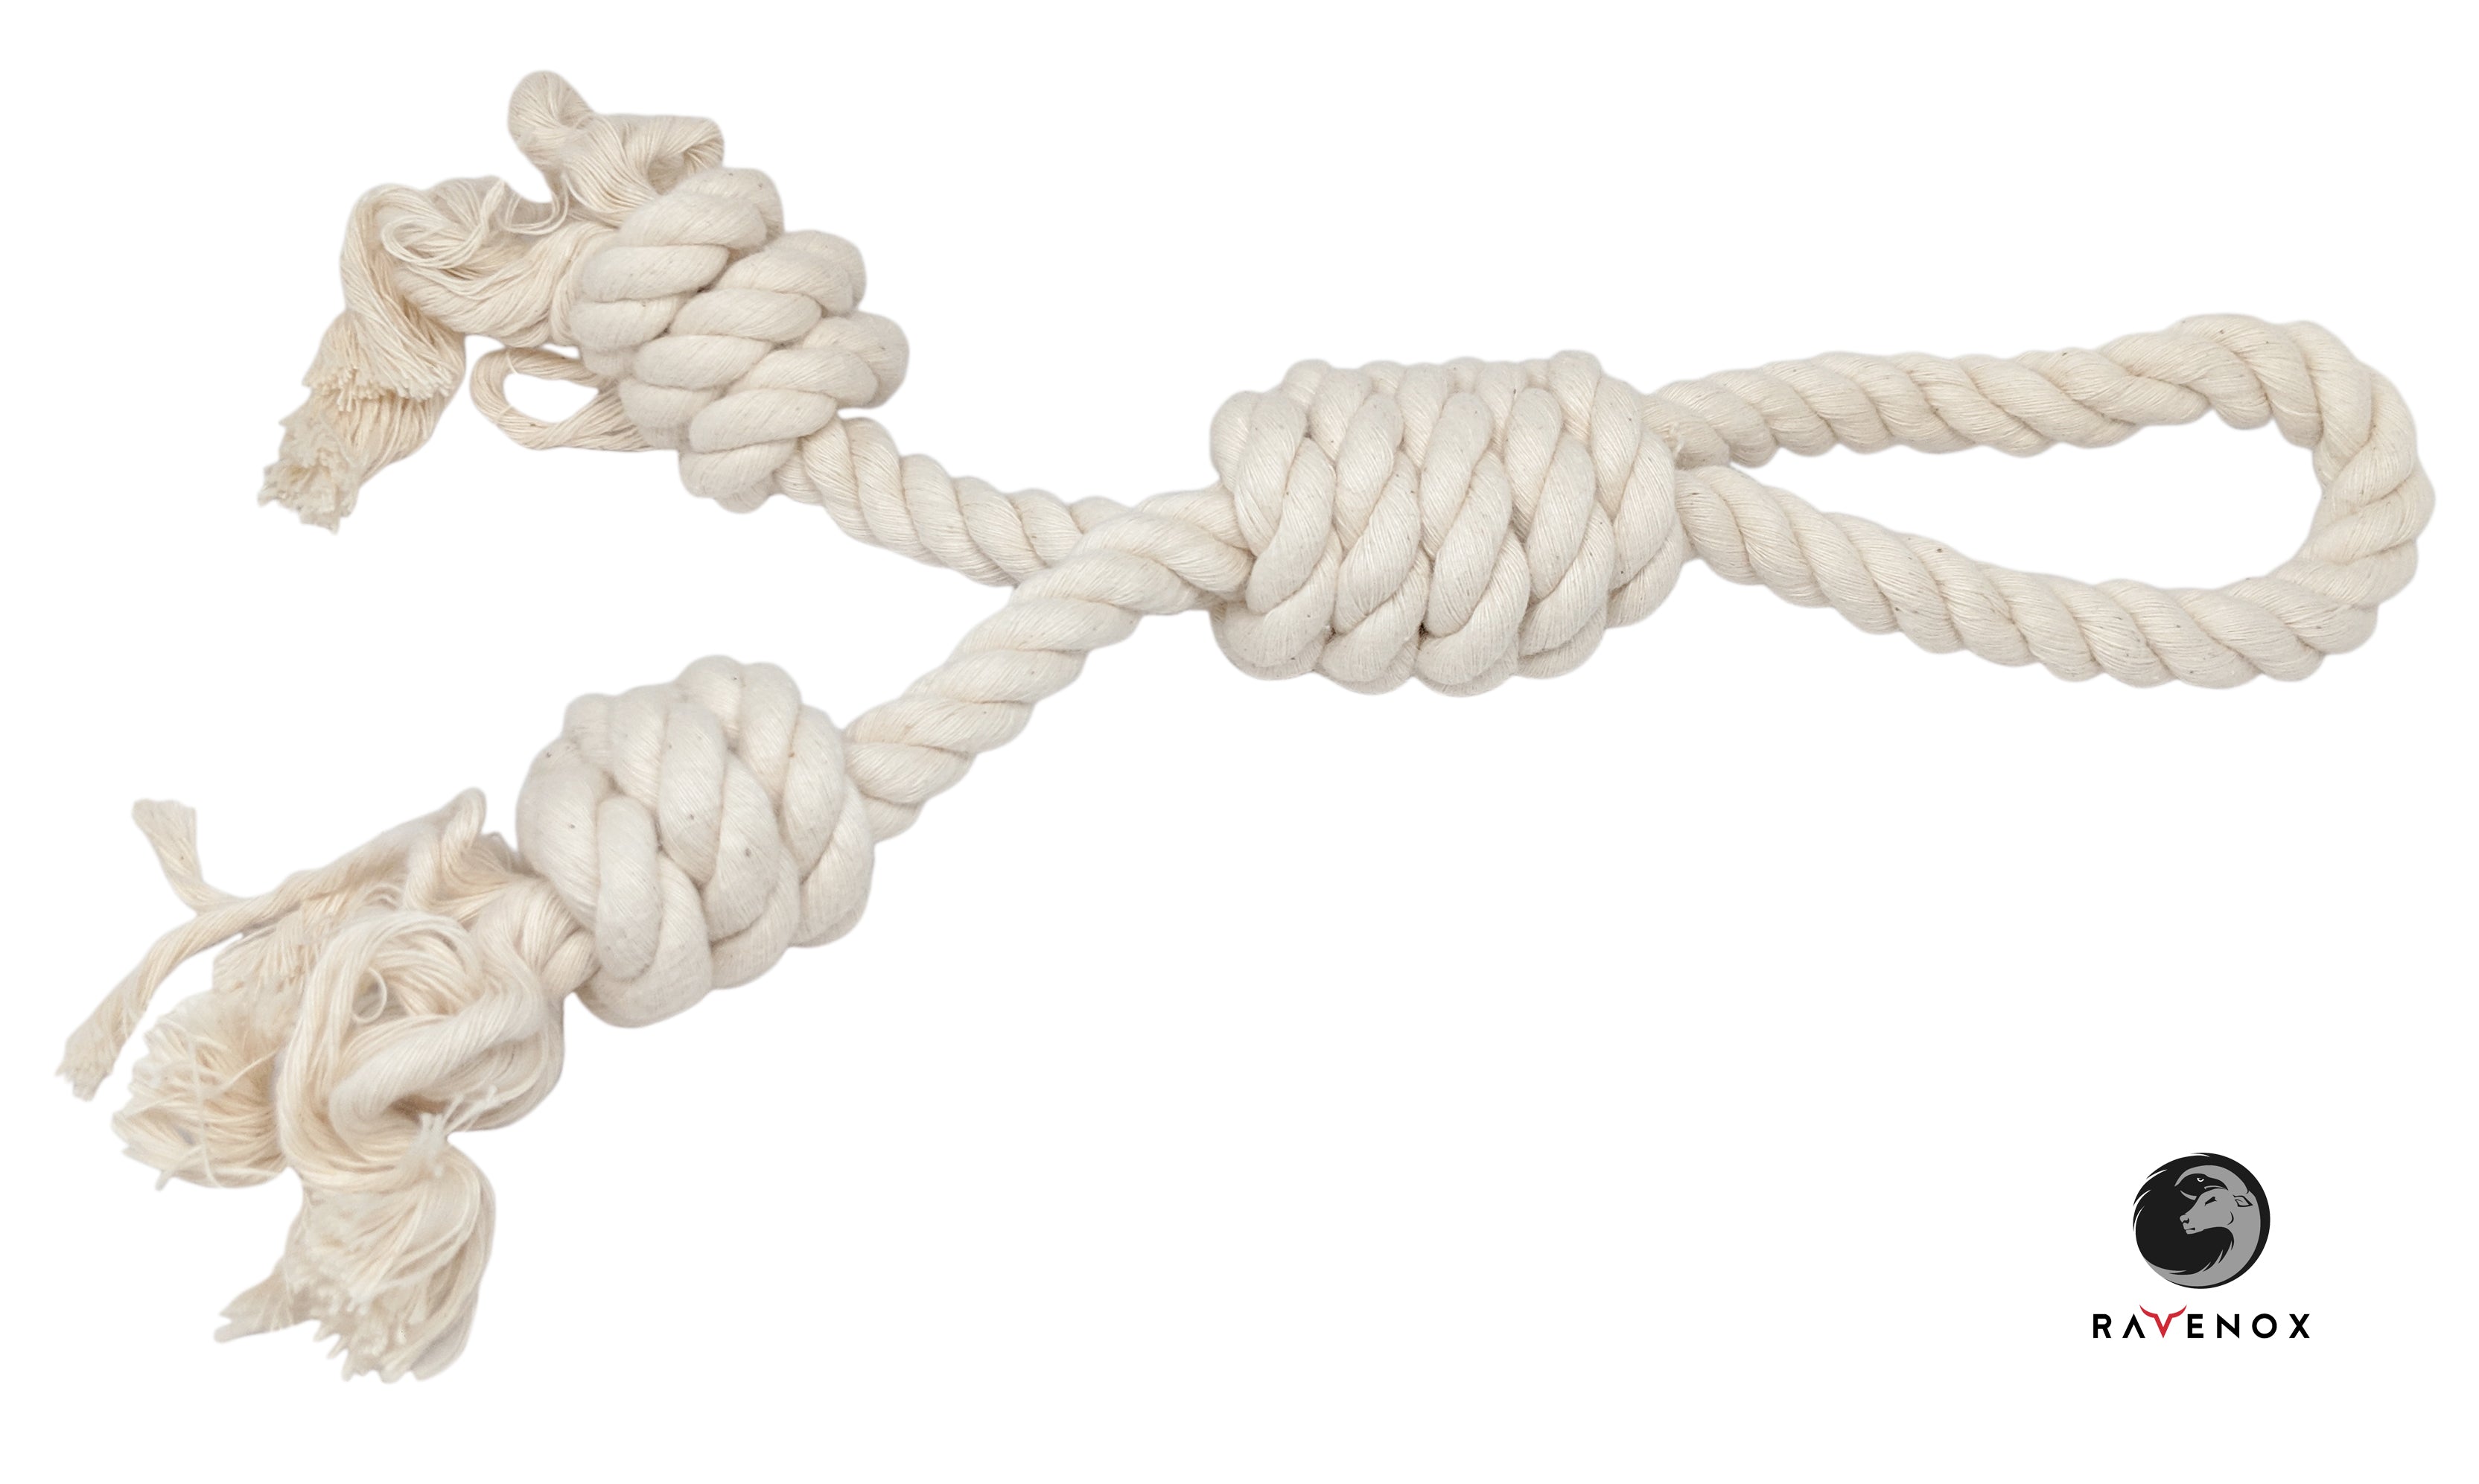 Ravenox 100% Cotton Twisted Rope | (White)(1/4 in x 10 ft) |USA Made  Natural Cord | Baker & Butchers Twine, Macramé, Knotting, Crafts, Pet Toys